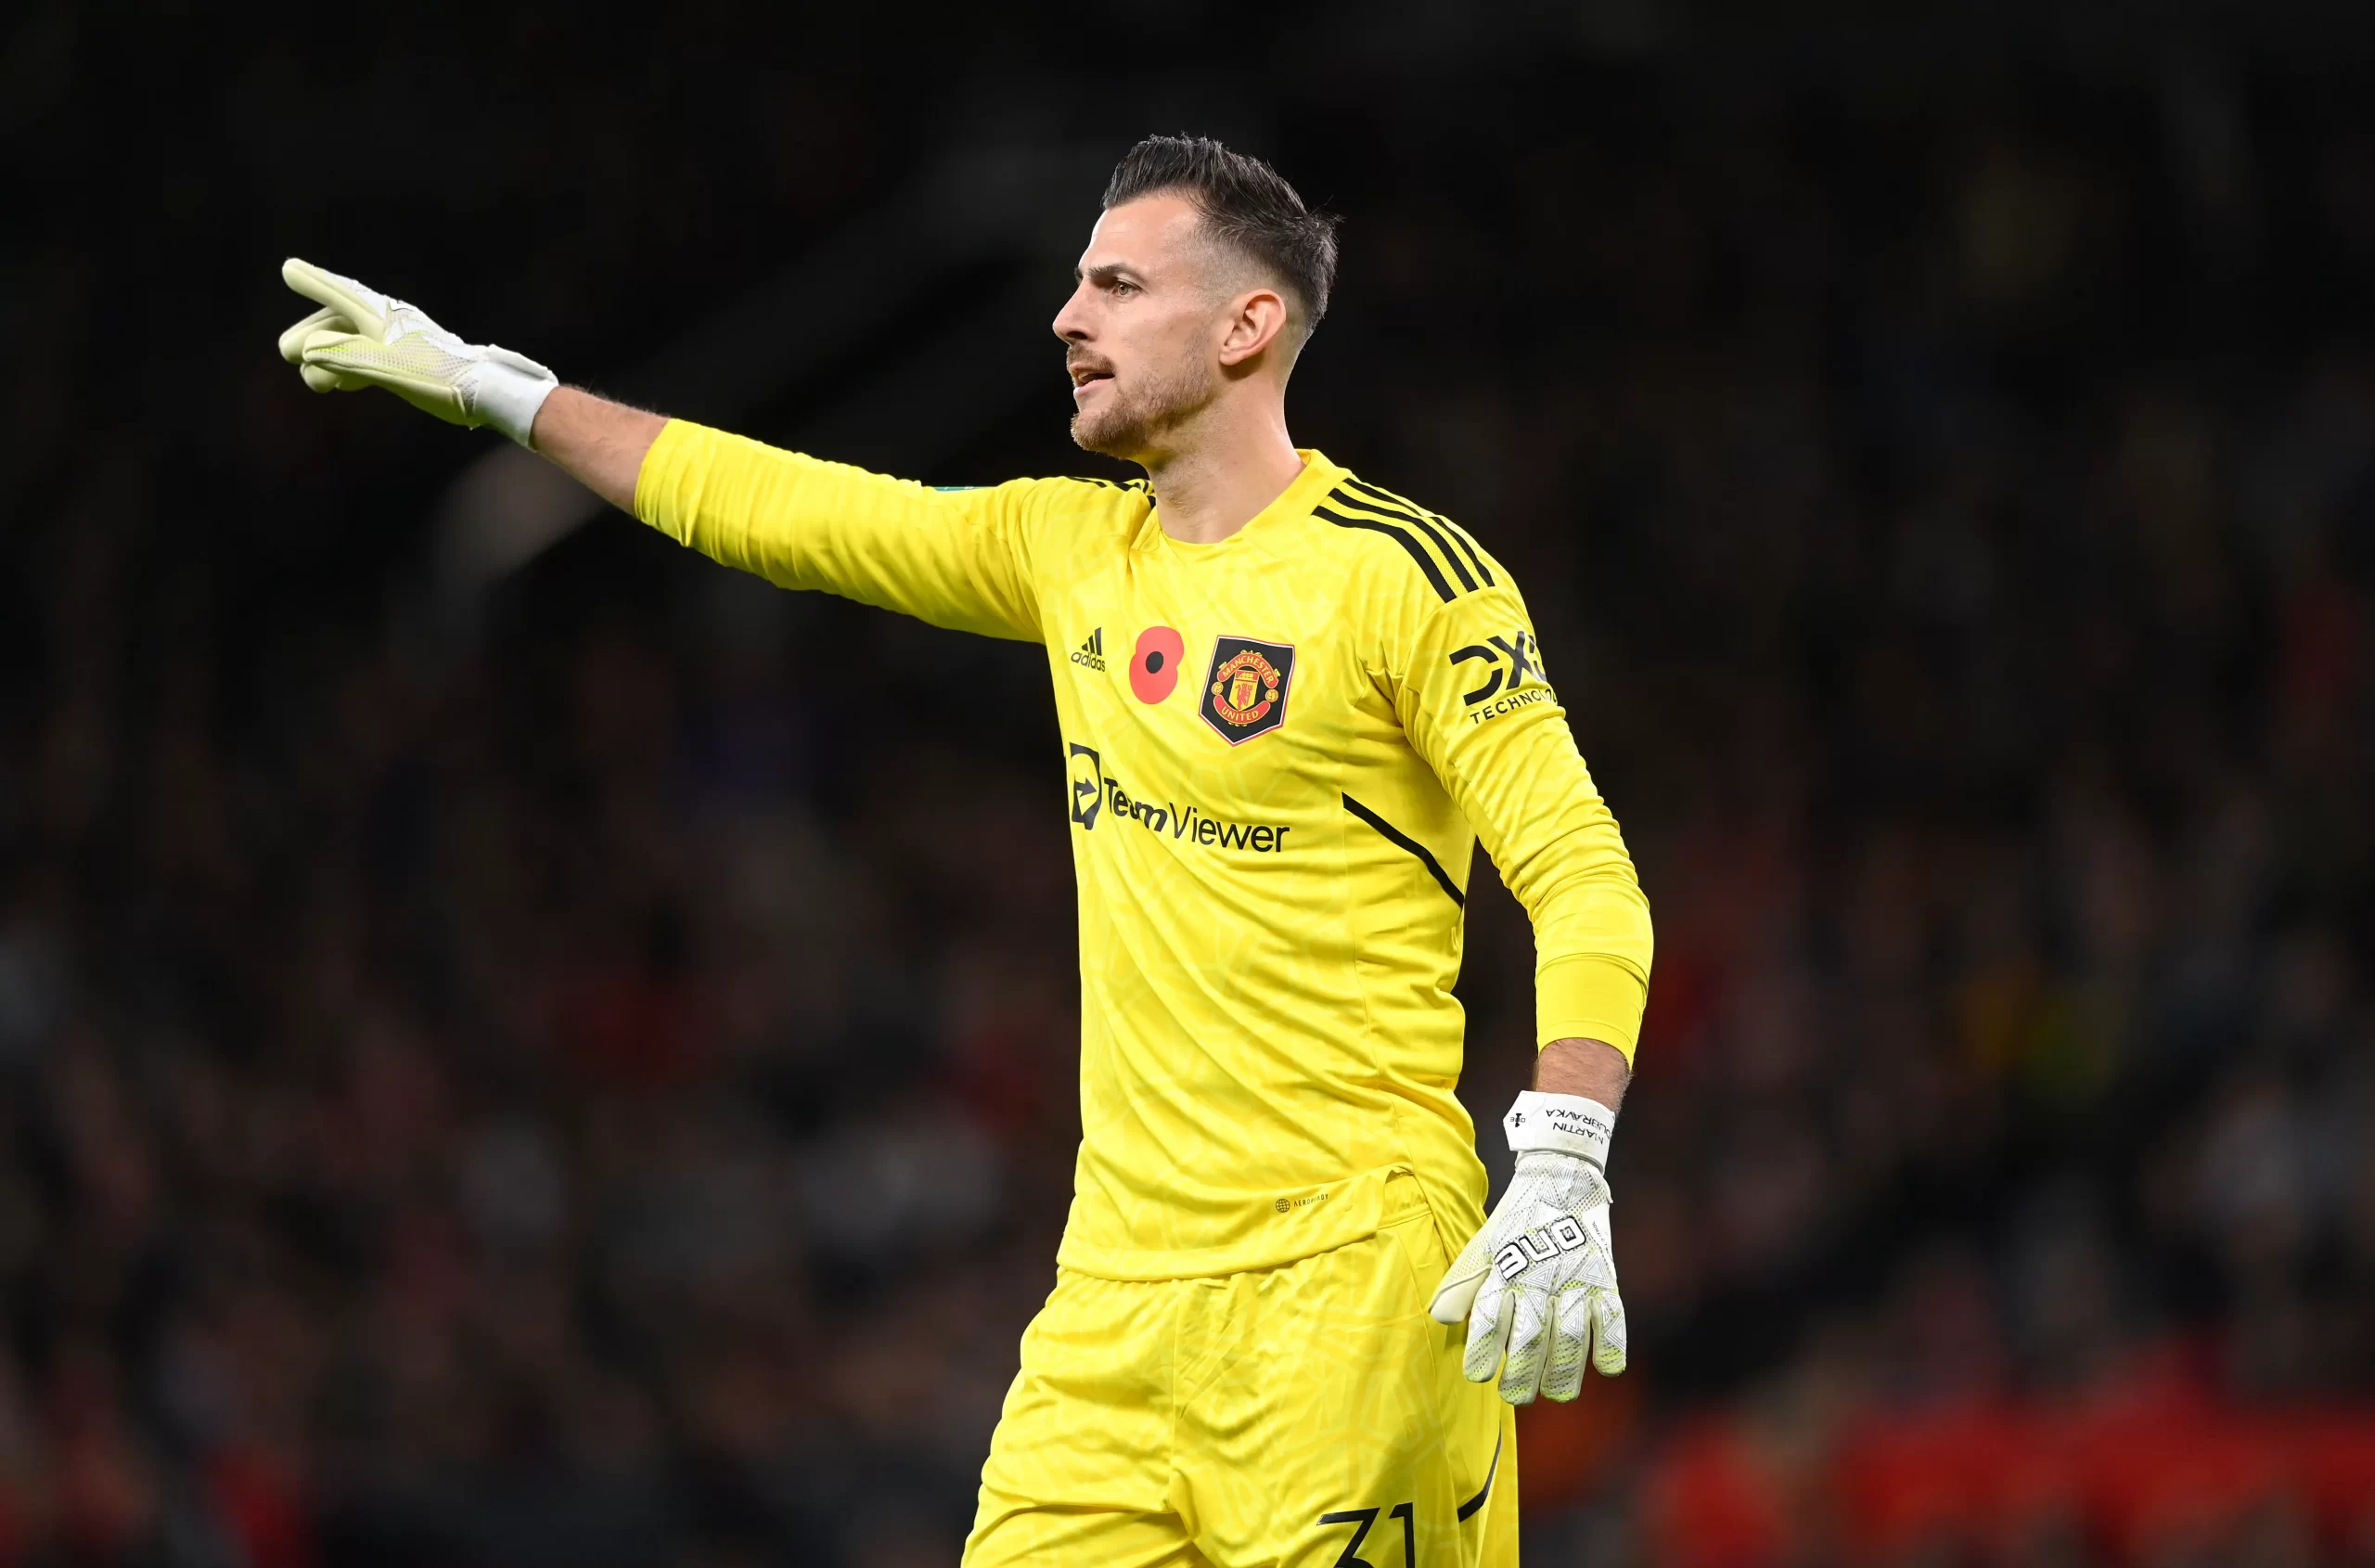 Martin Dubravka was put in a strange situation after receiving a winning medal from Manchester United